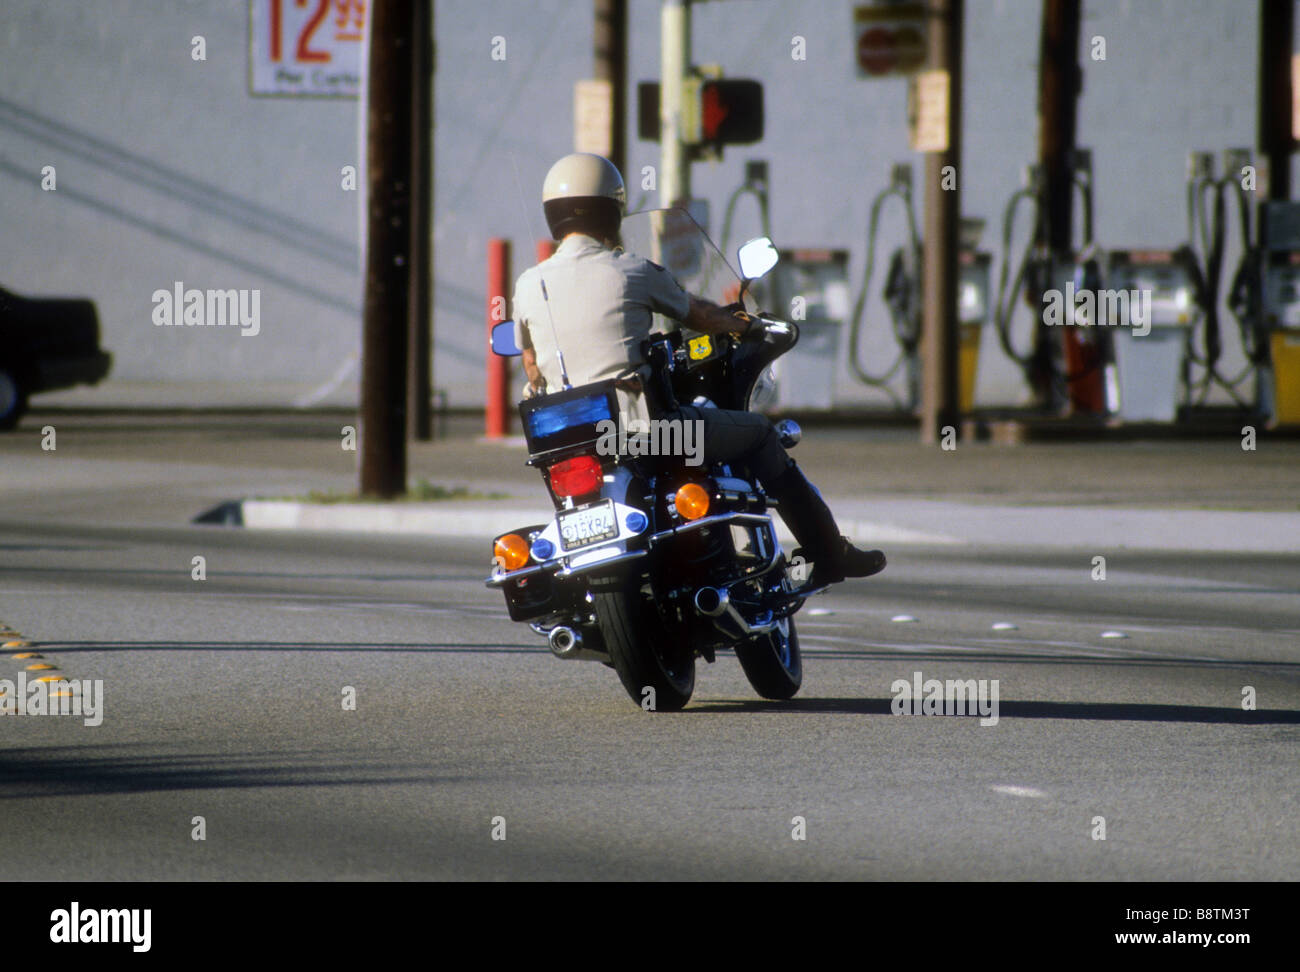 California Highway patrol officer on motor cycle motorcycle turns onto roadway Stock Photo